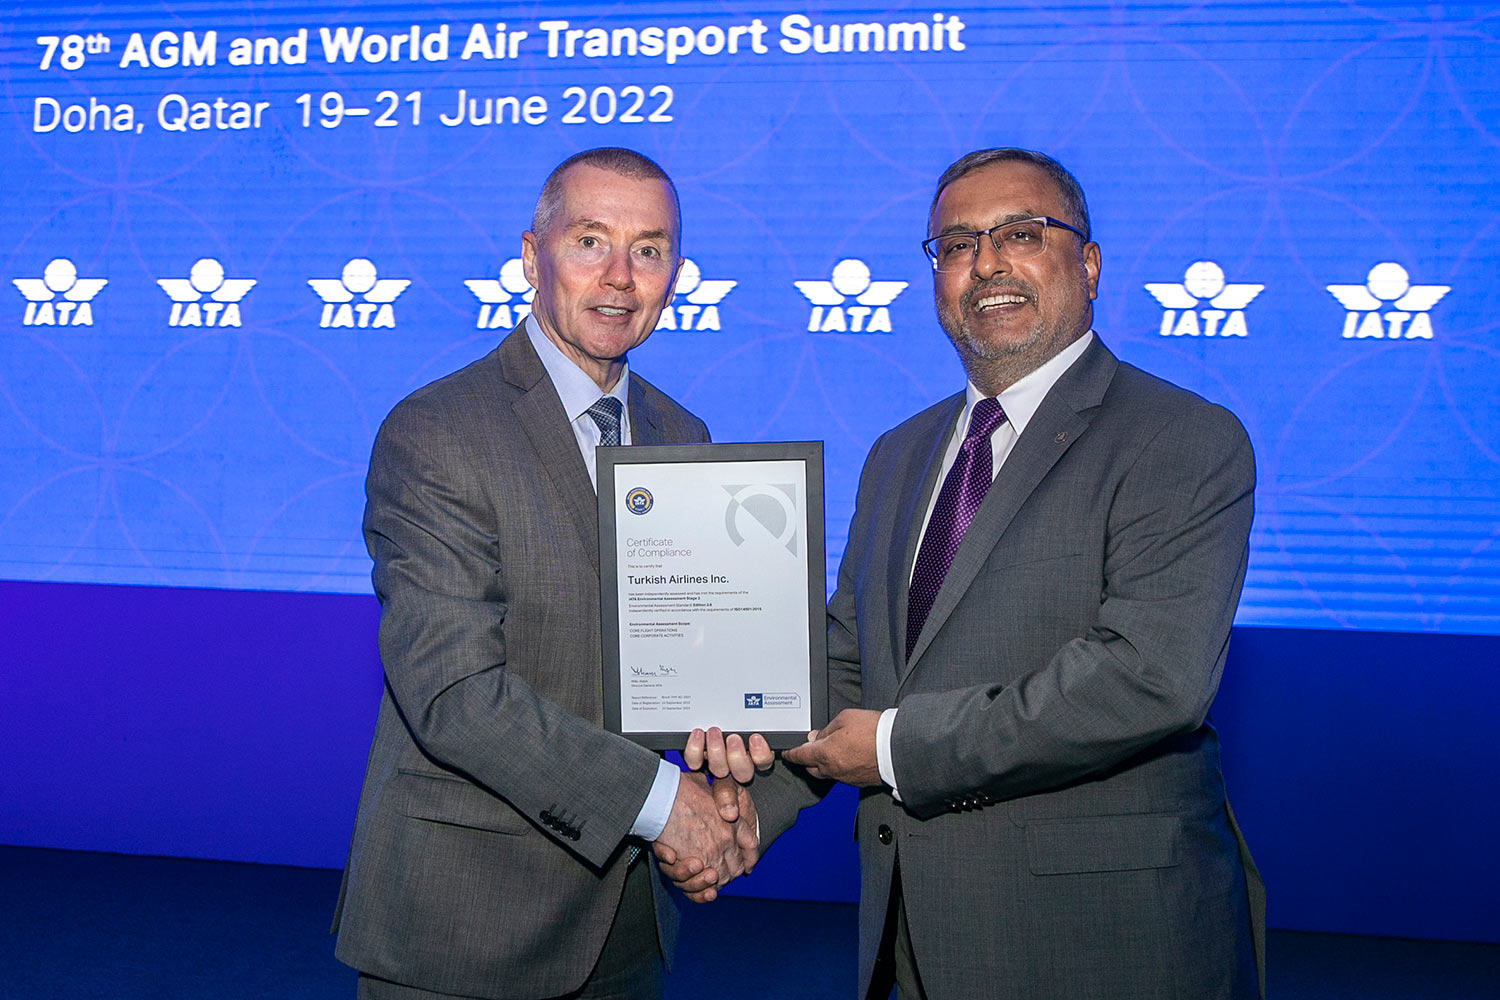 Turkish Airlines got the Stage 2 certificate which signifies the highest level of IATA IEnvA (Environmental Assessment) program compliance